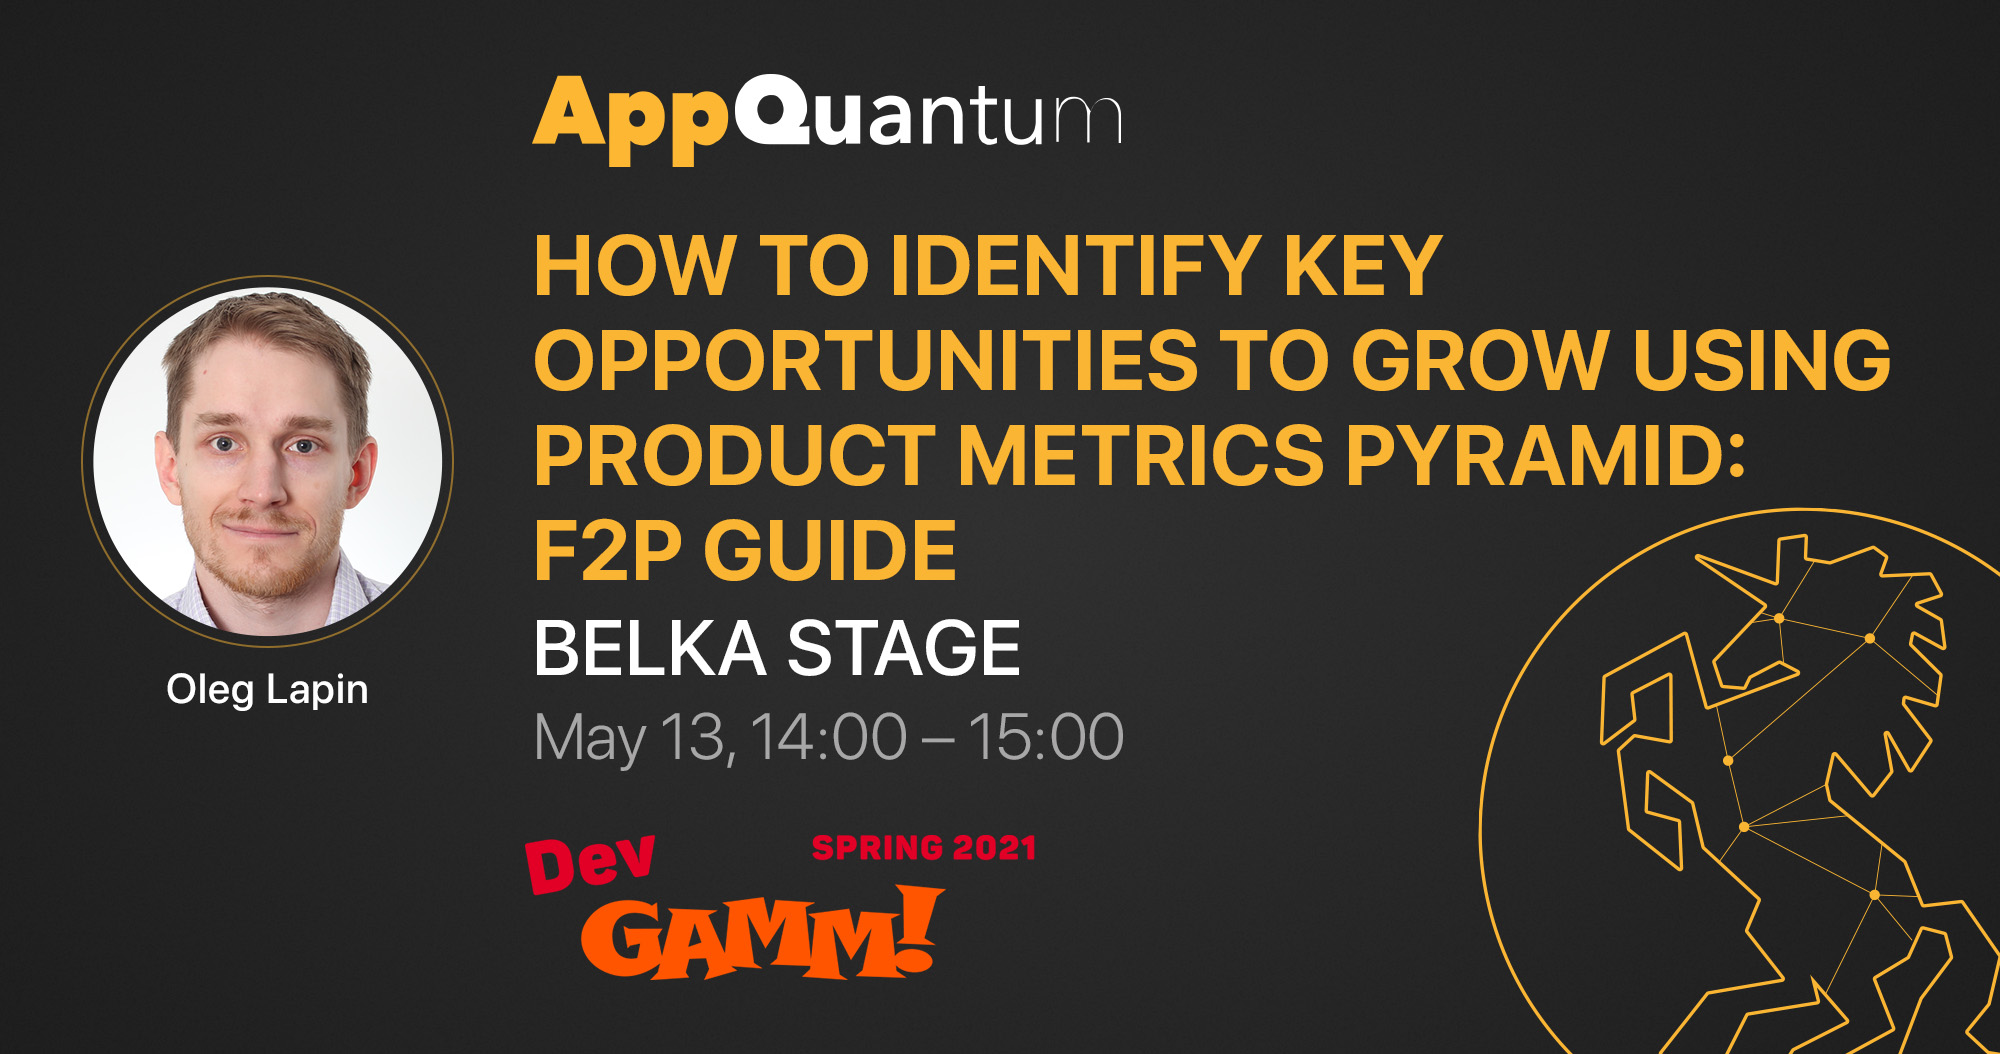 AppQuantum Takes Part in DevGamm Spring 2021 Conference